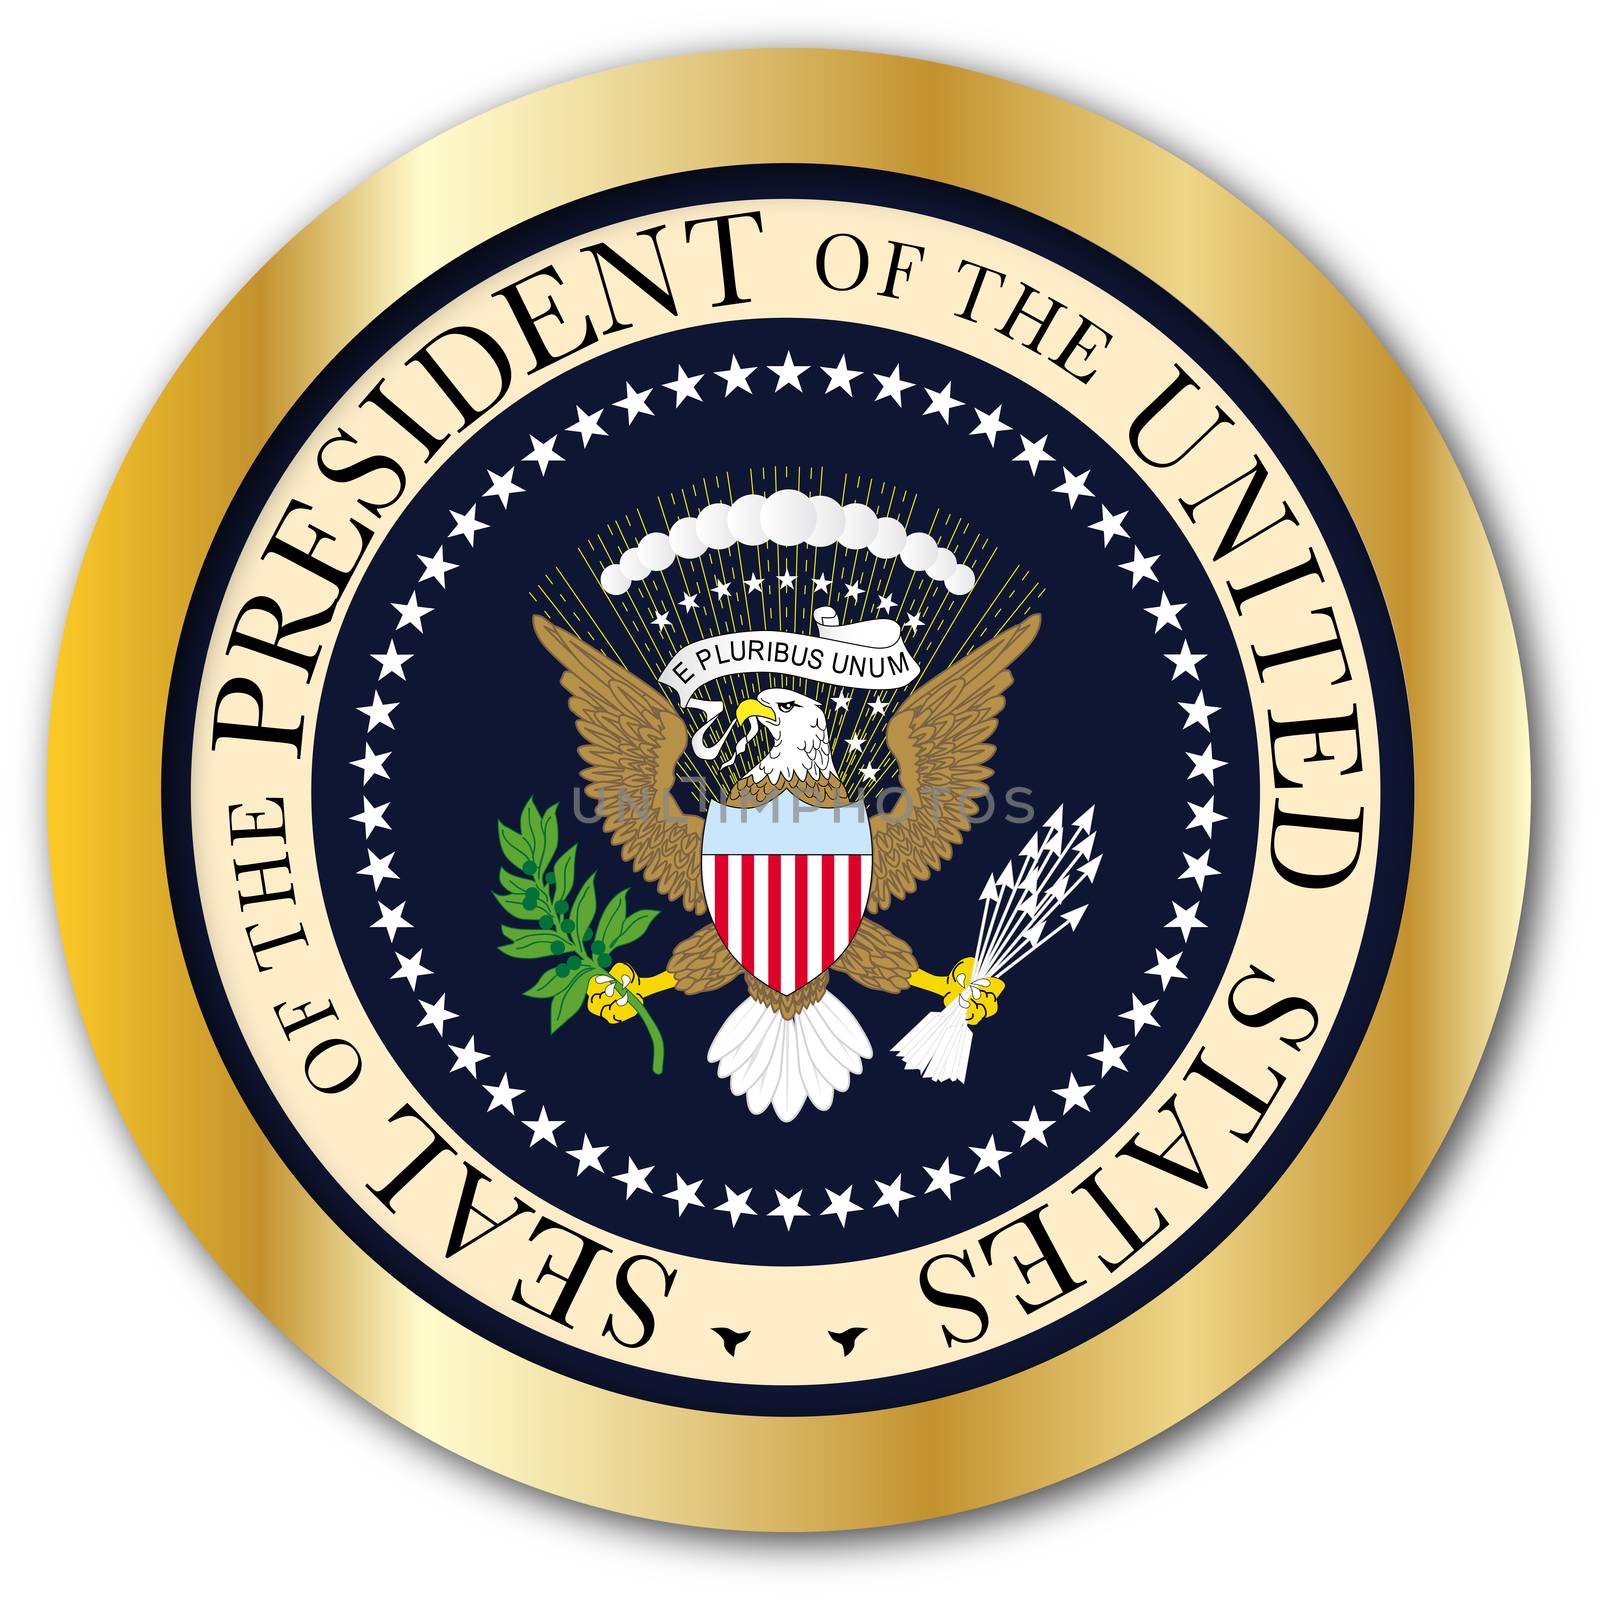 A depiction of the seal of the president of the United States of America as a button